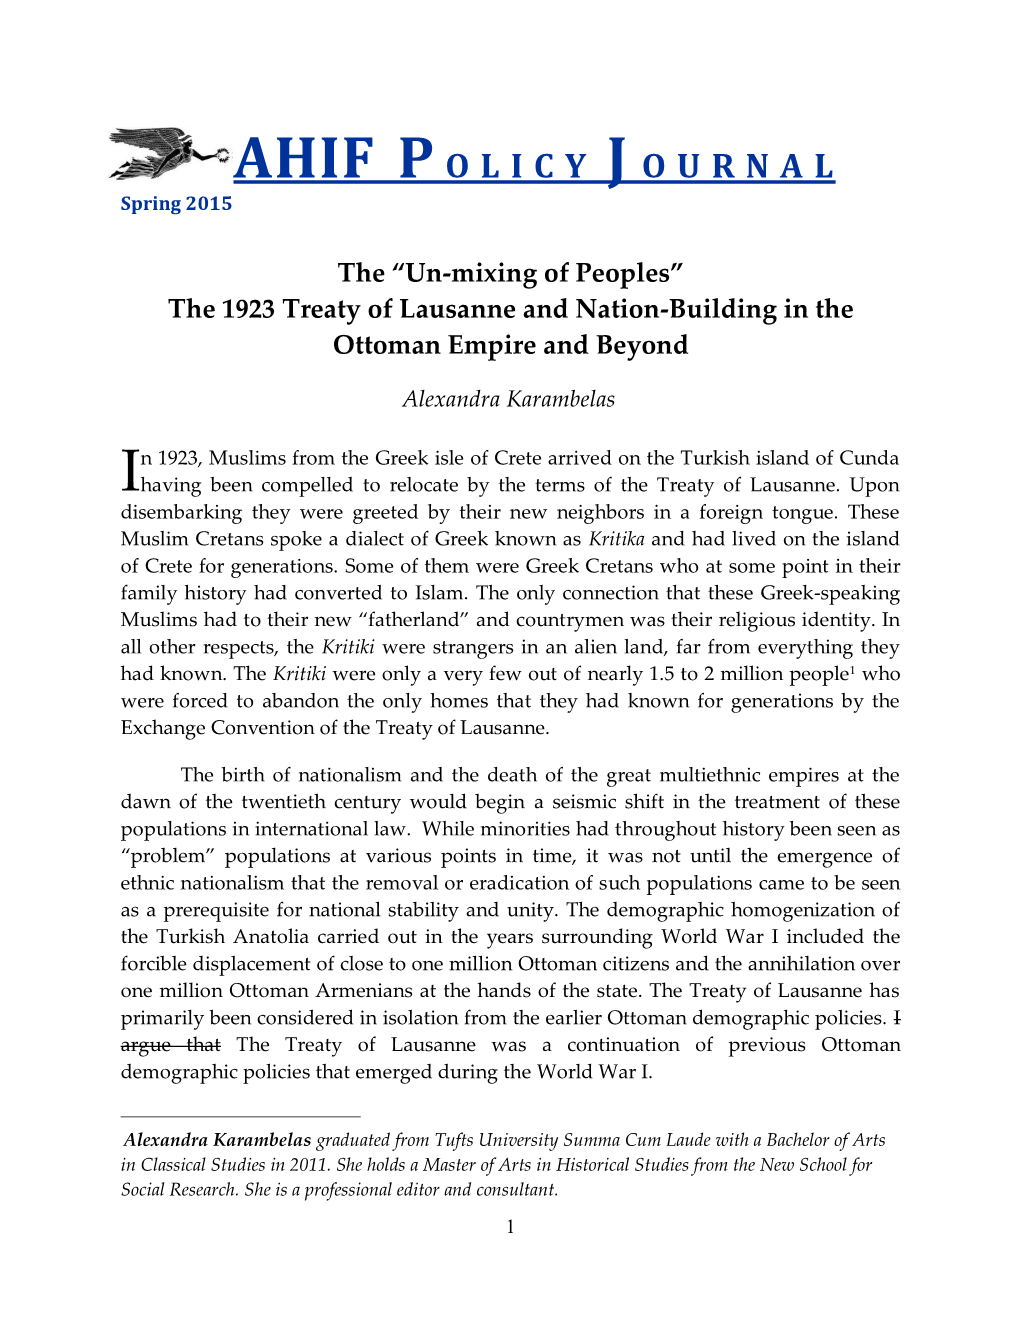 The 1923 Treaty of Lausanne and Nation-Building in the Ottoman Empire and Beyond